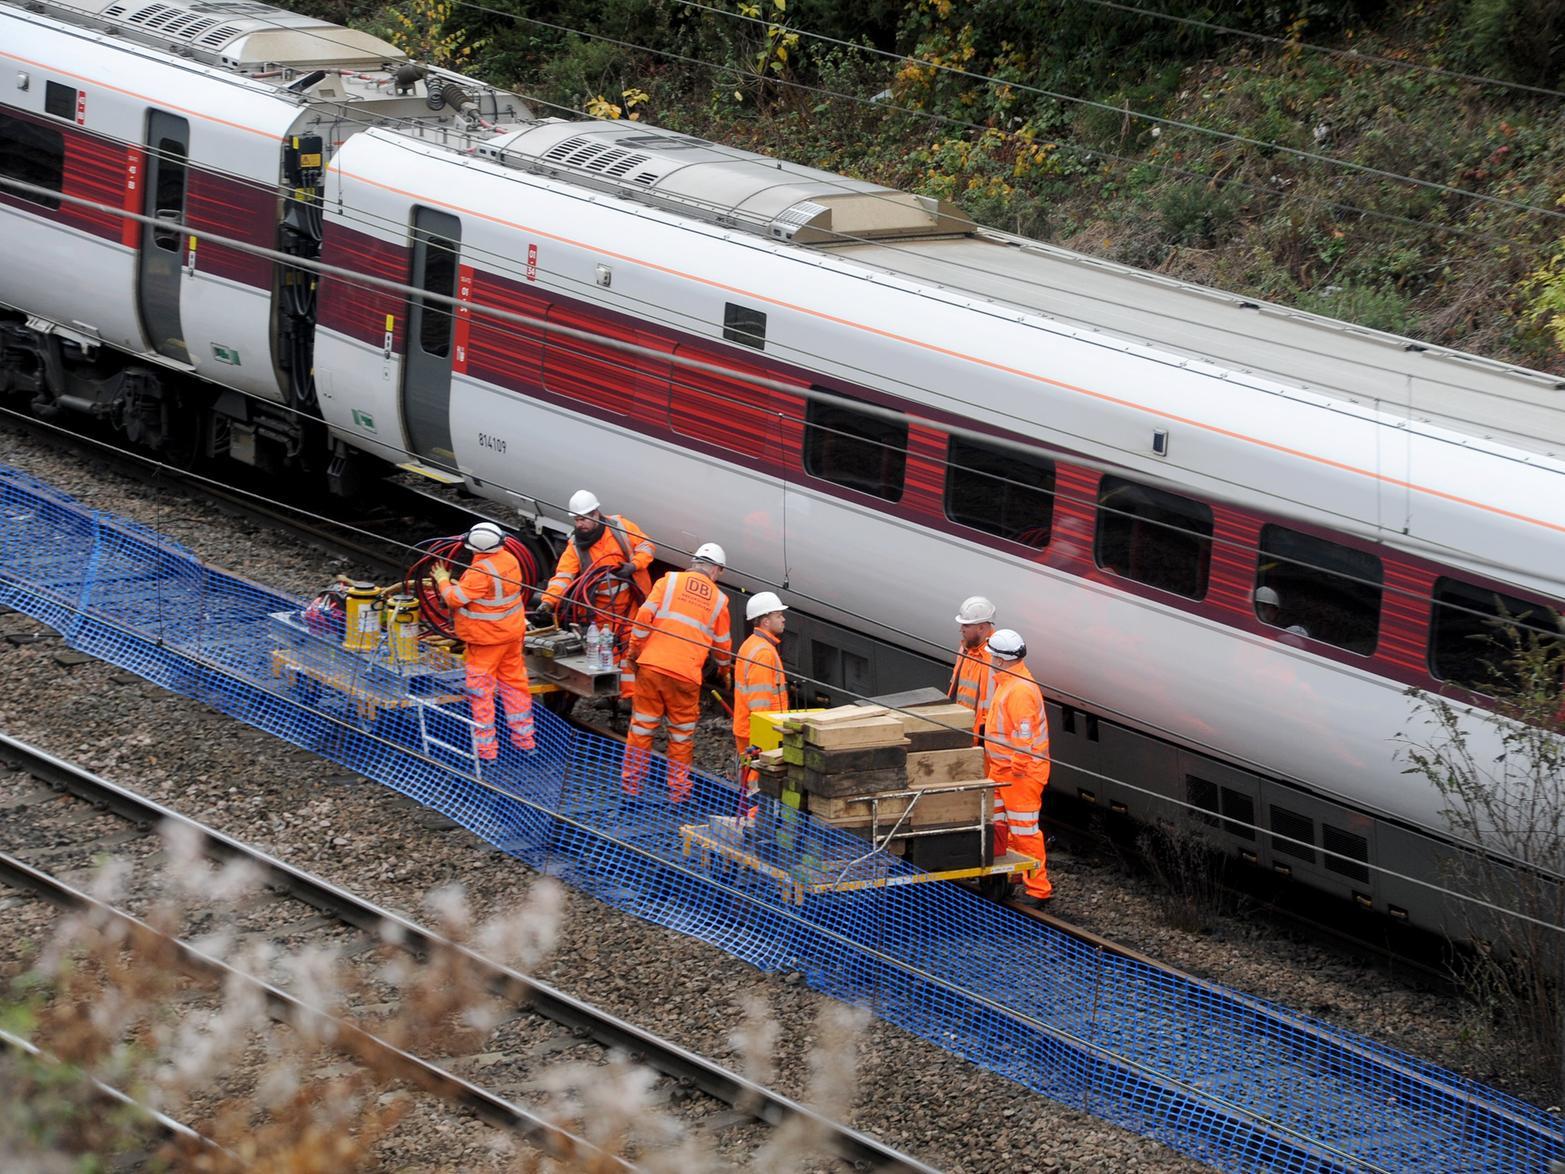 Engineers working on the derailed train.